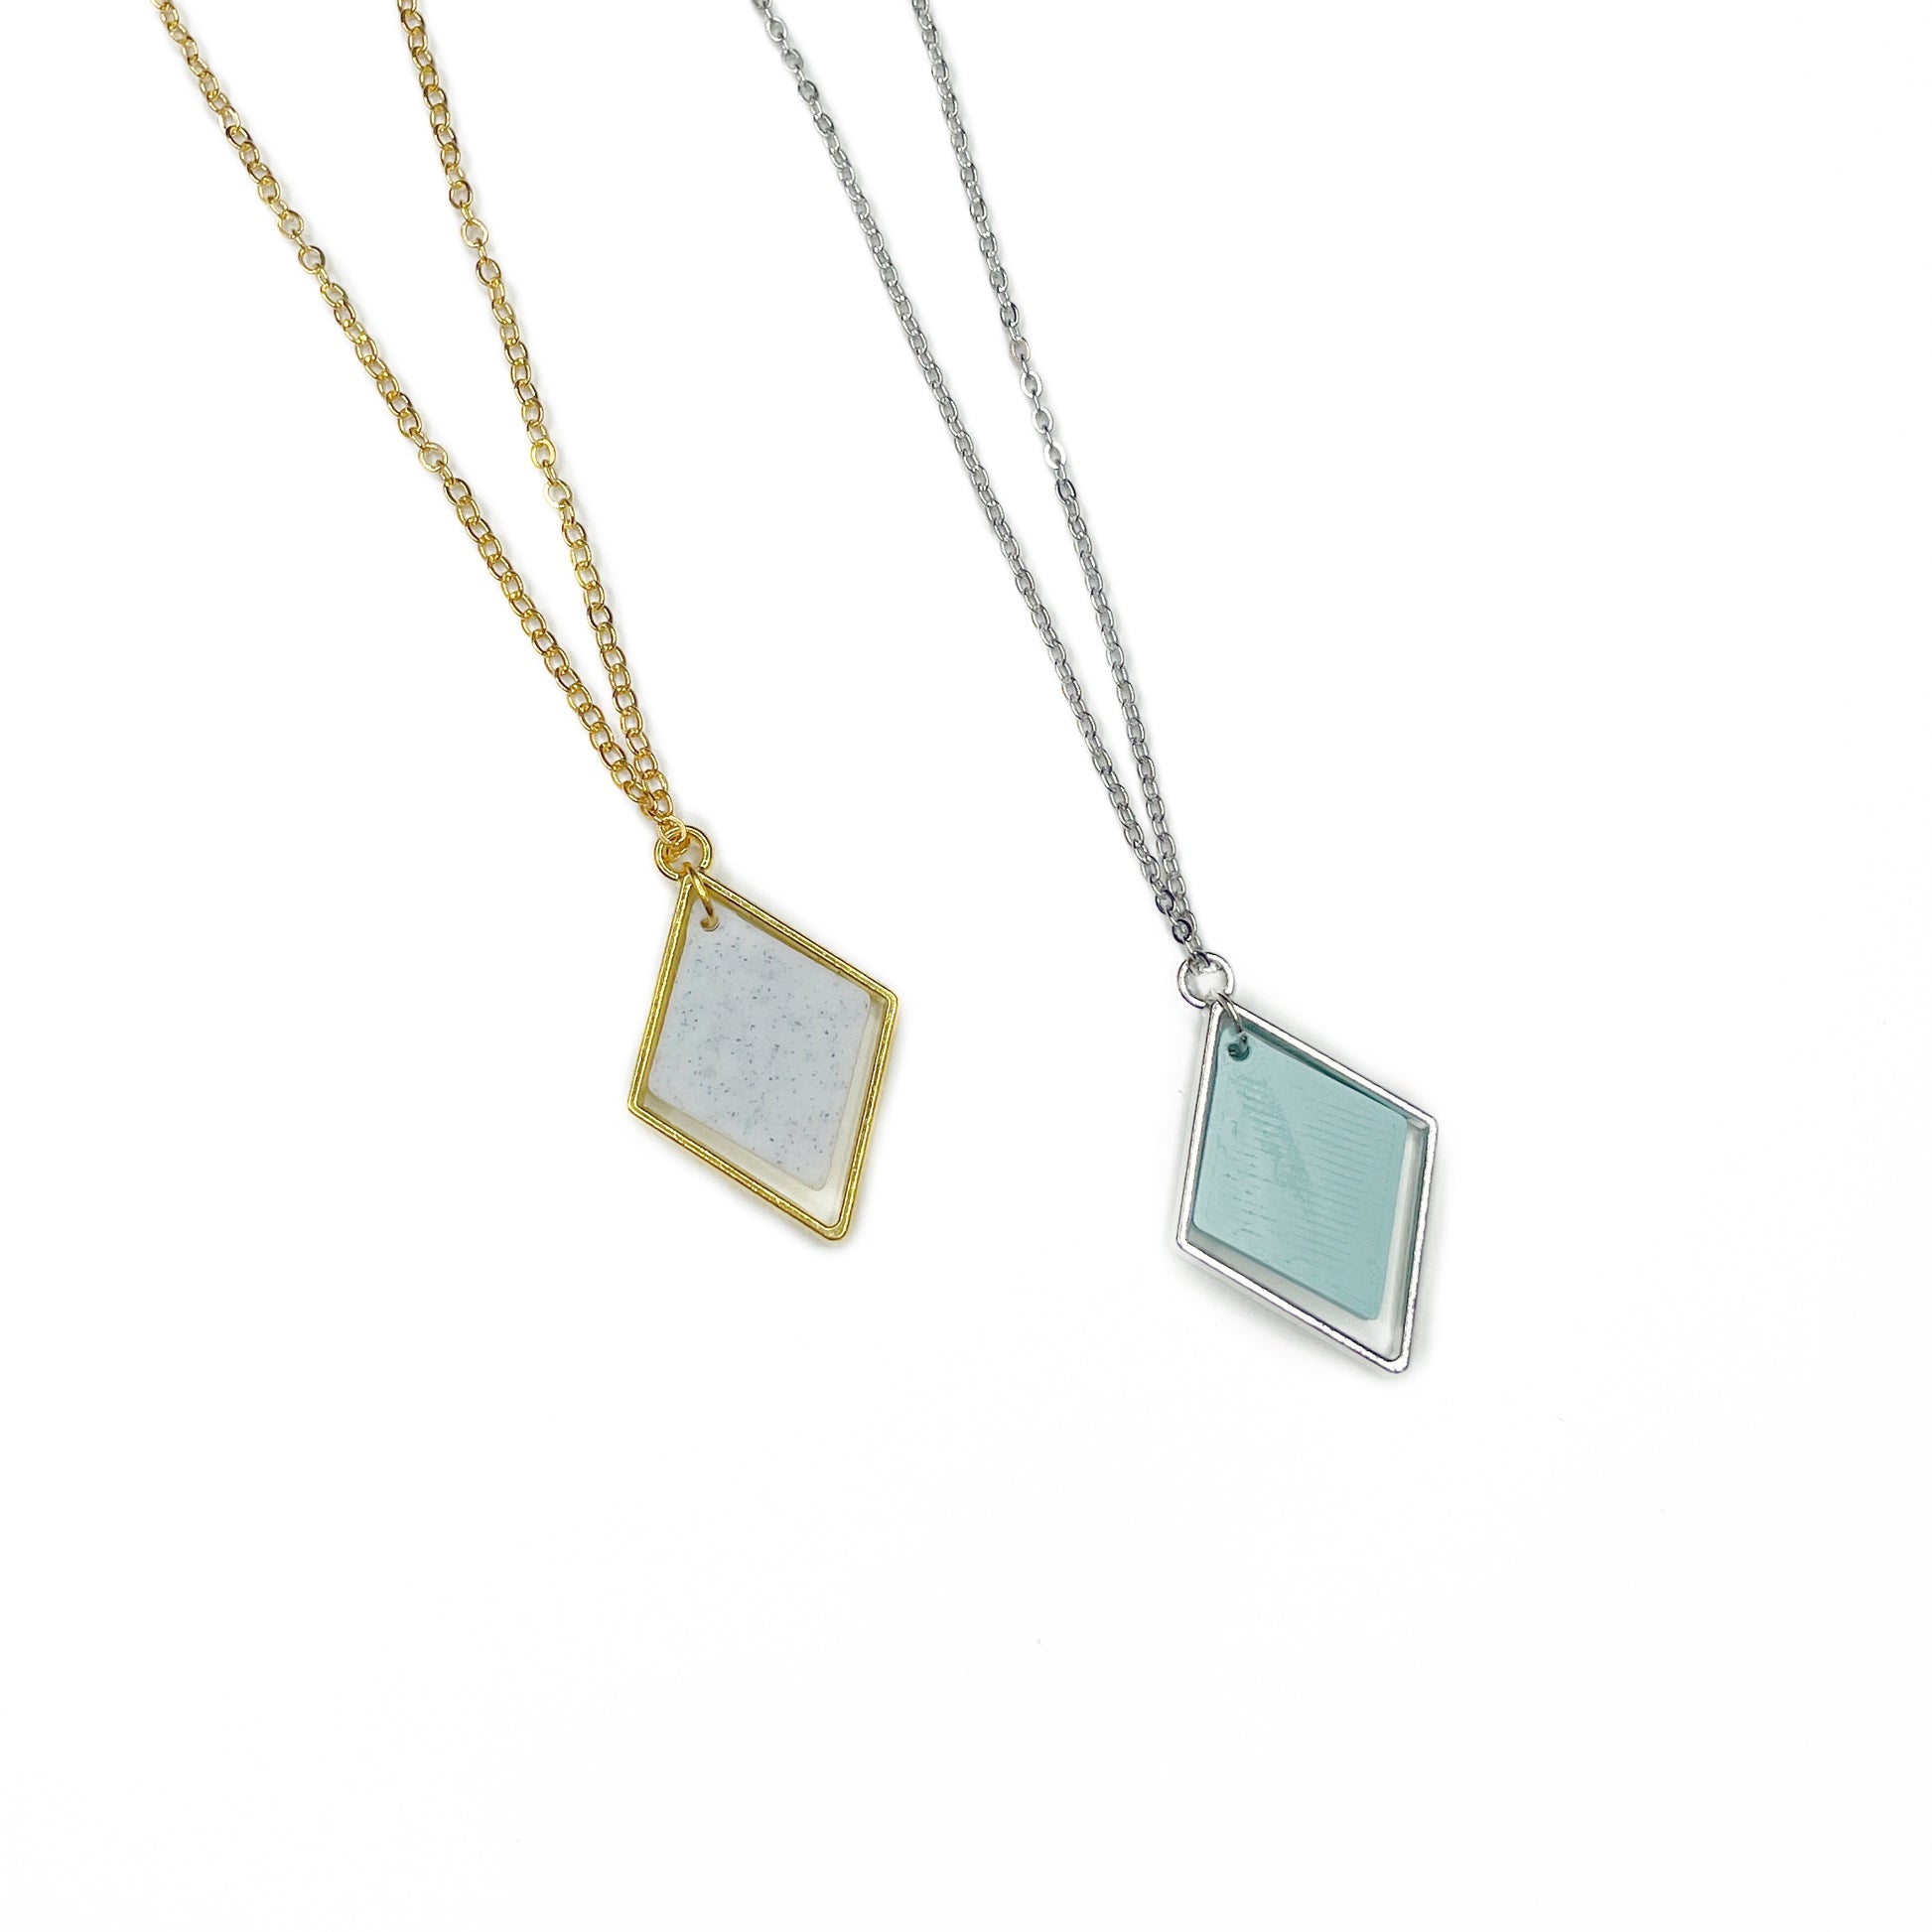 rhombus necklaces long gold white blue speckled